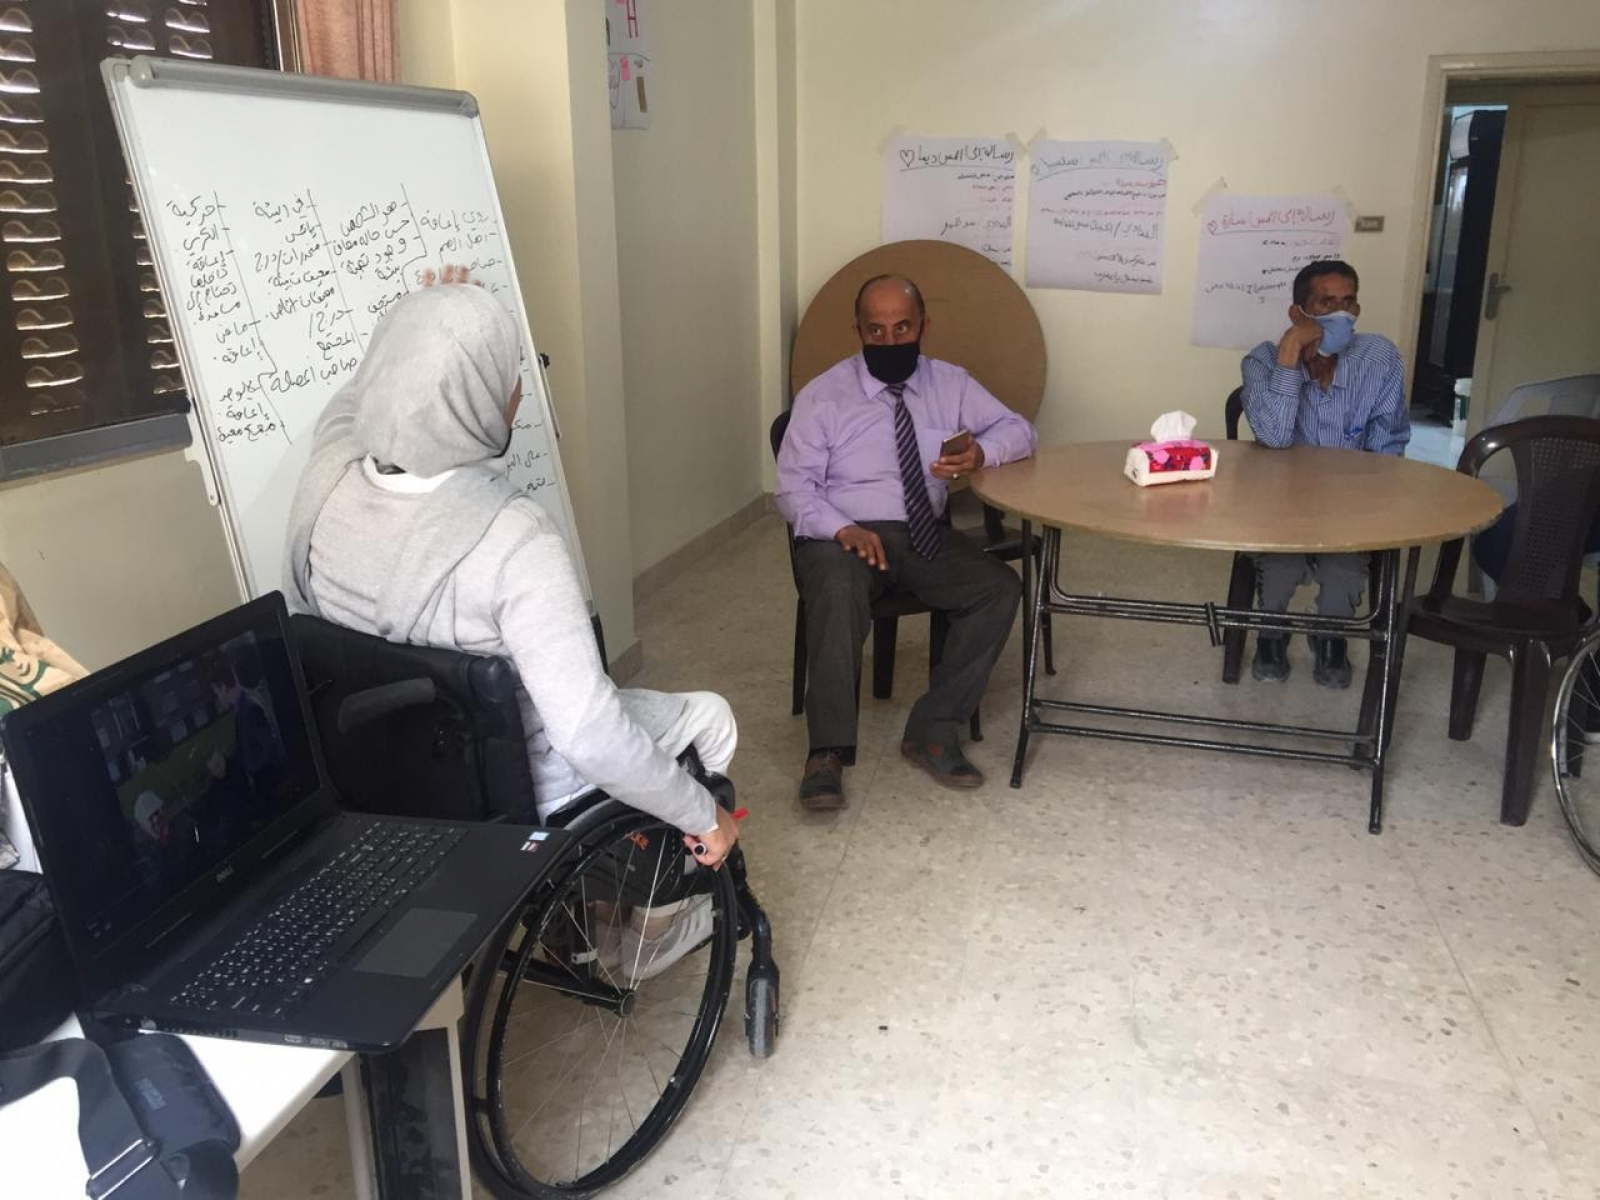 Establishing an Inclusive Electoral Process in Jordan: Persons with Disabilities Take Action!